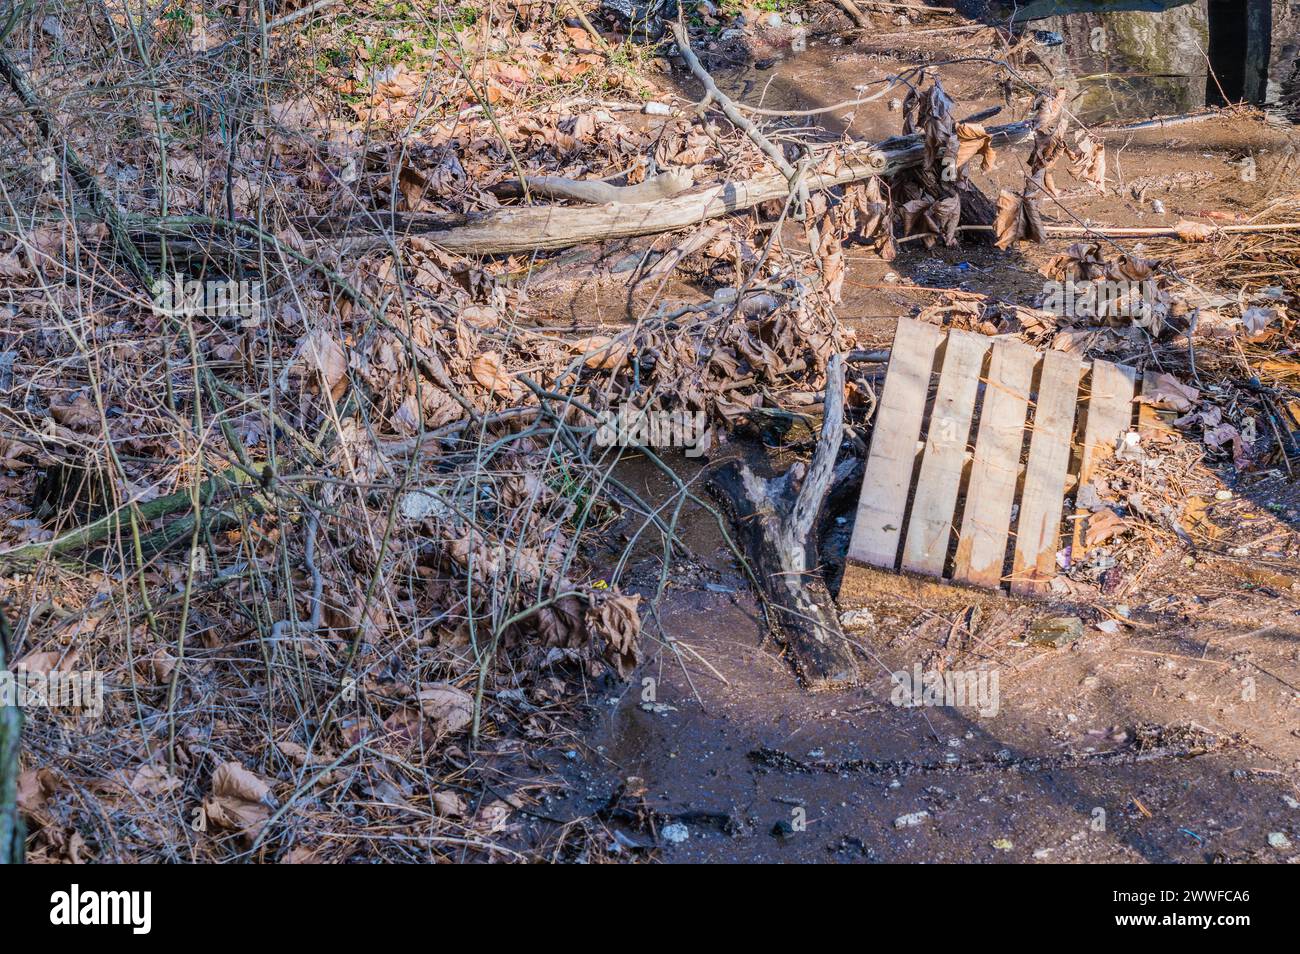 A decaying wooden pallet lies abandoned among leaves and branches, in South Korea Stock Photo